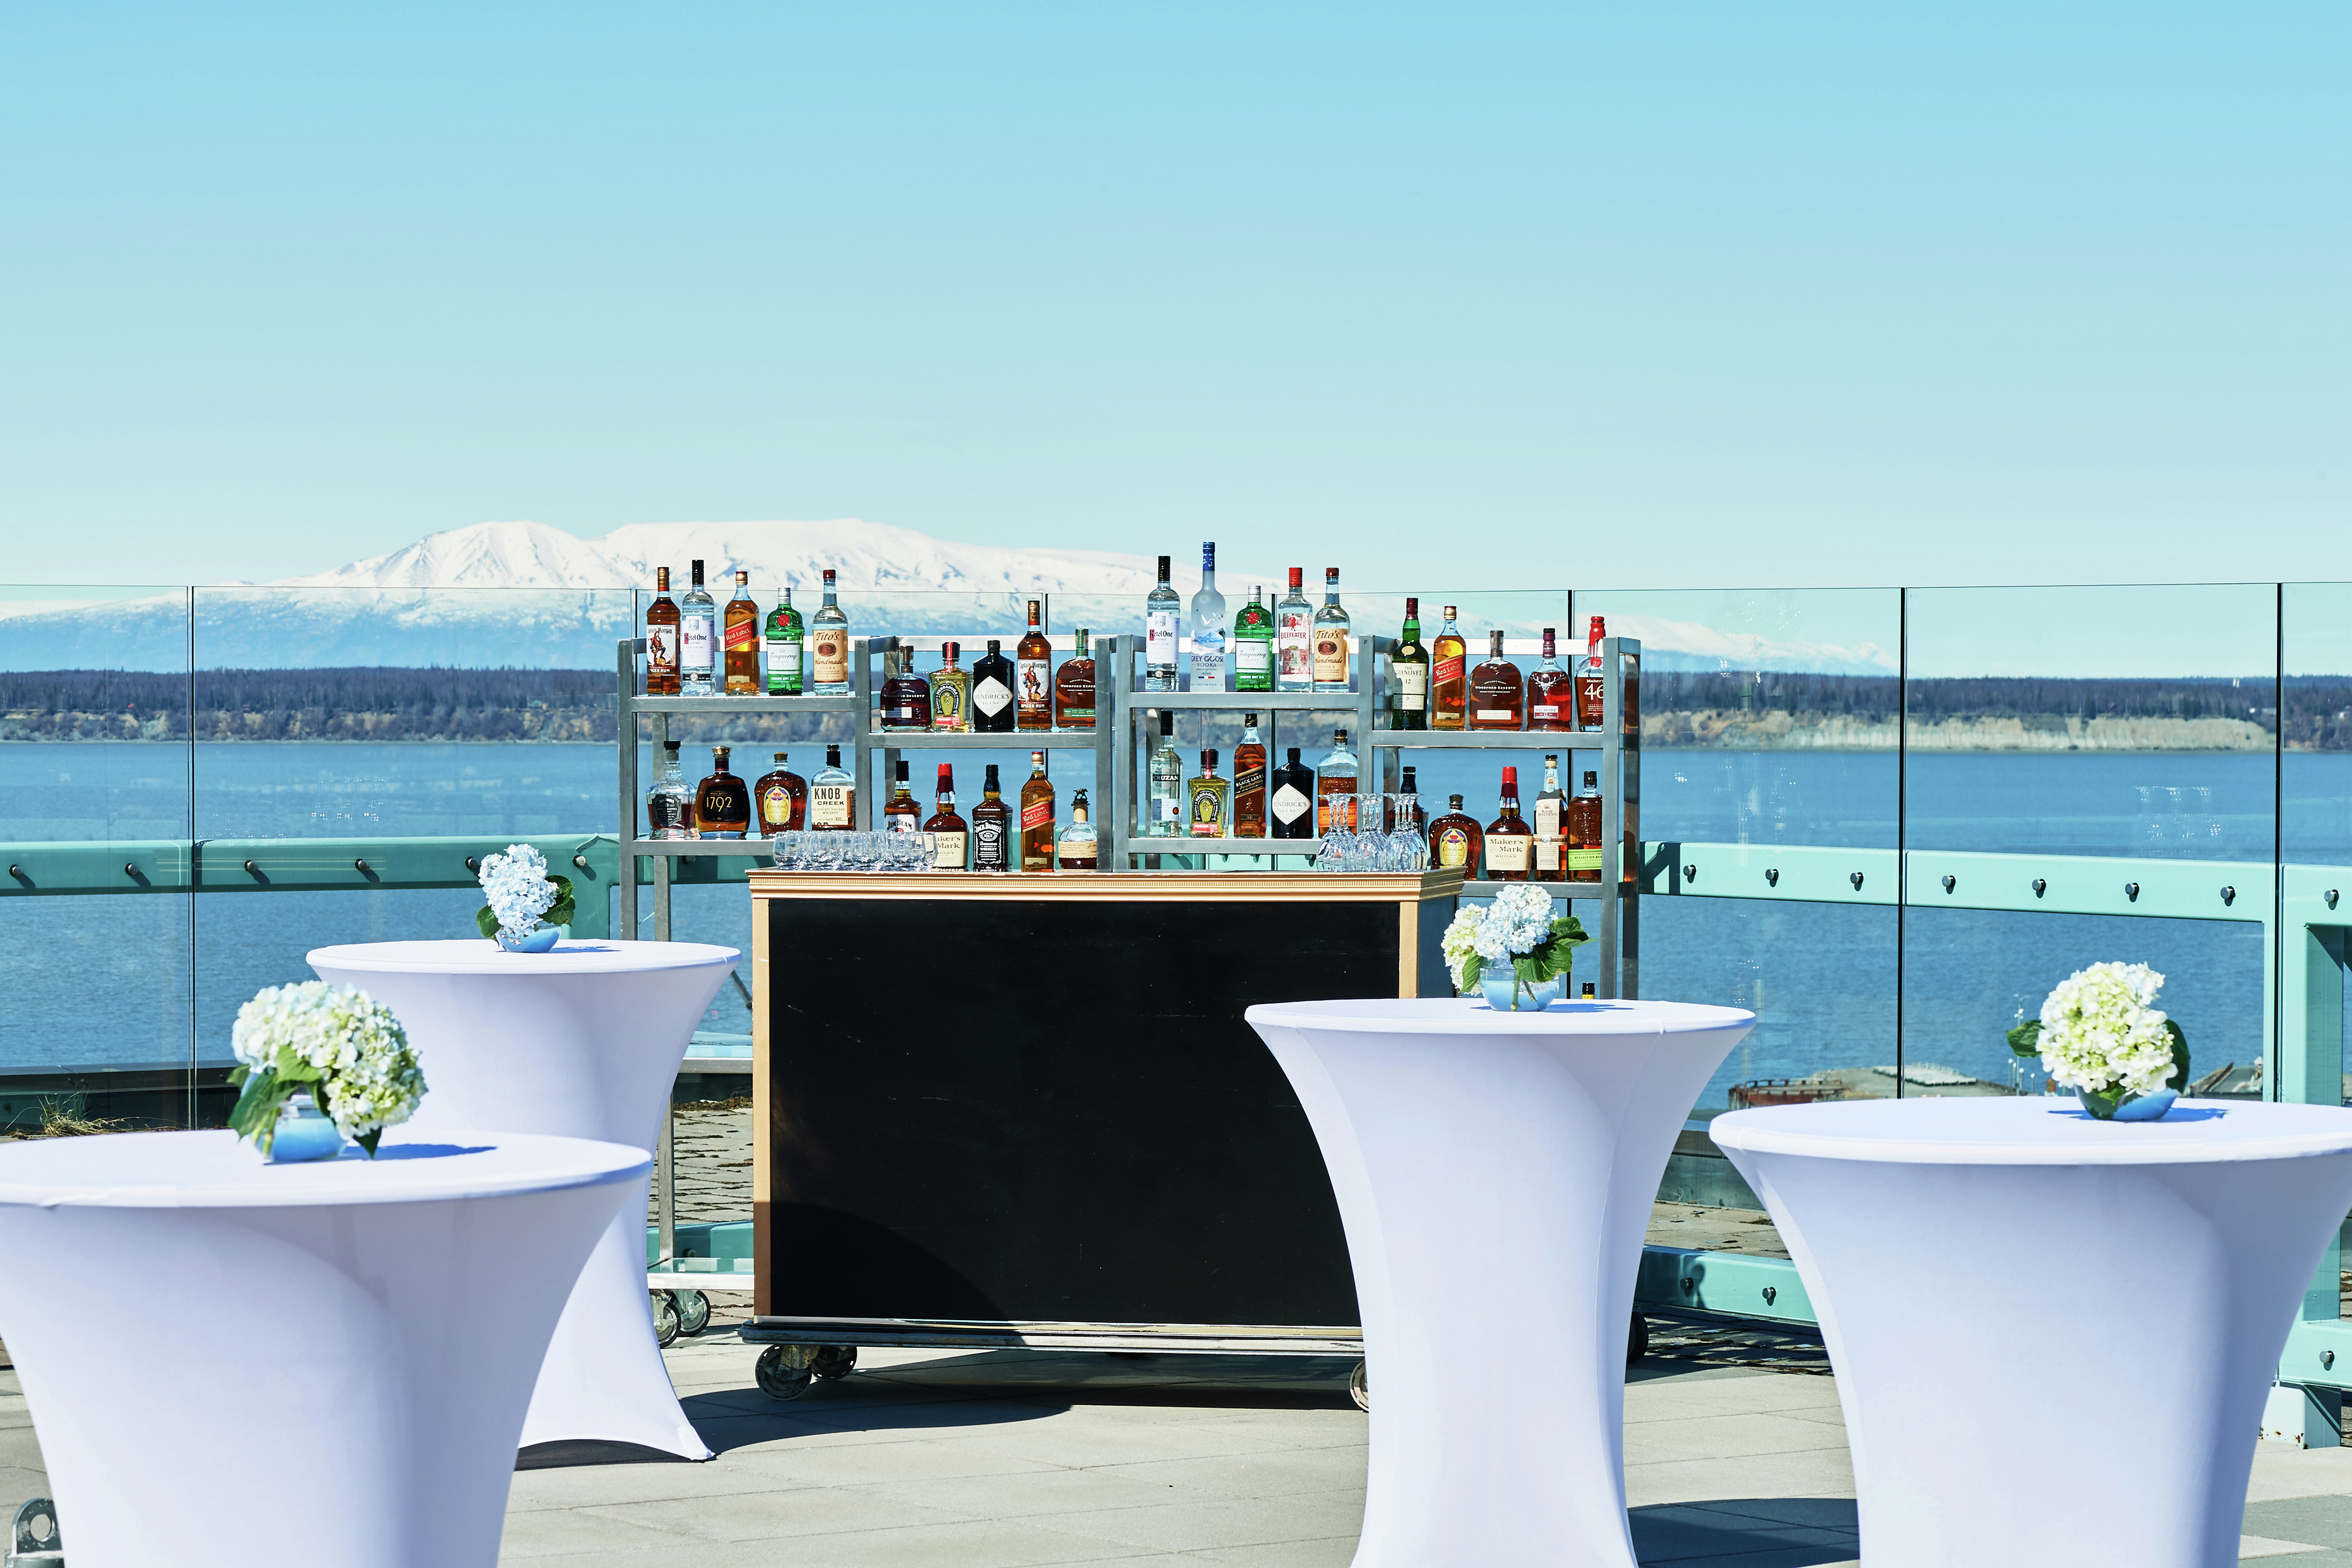 Outdoor Meeting Space with Bar Area and Water Views